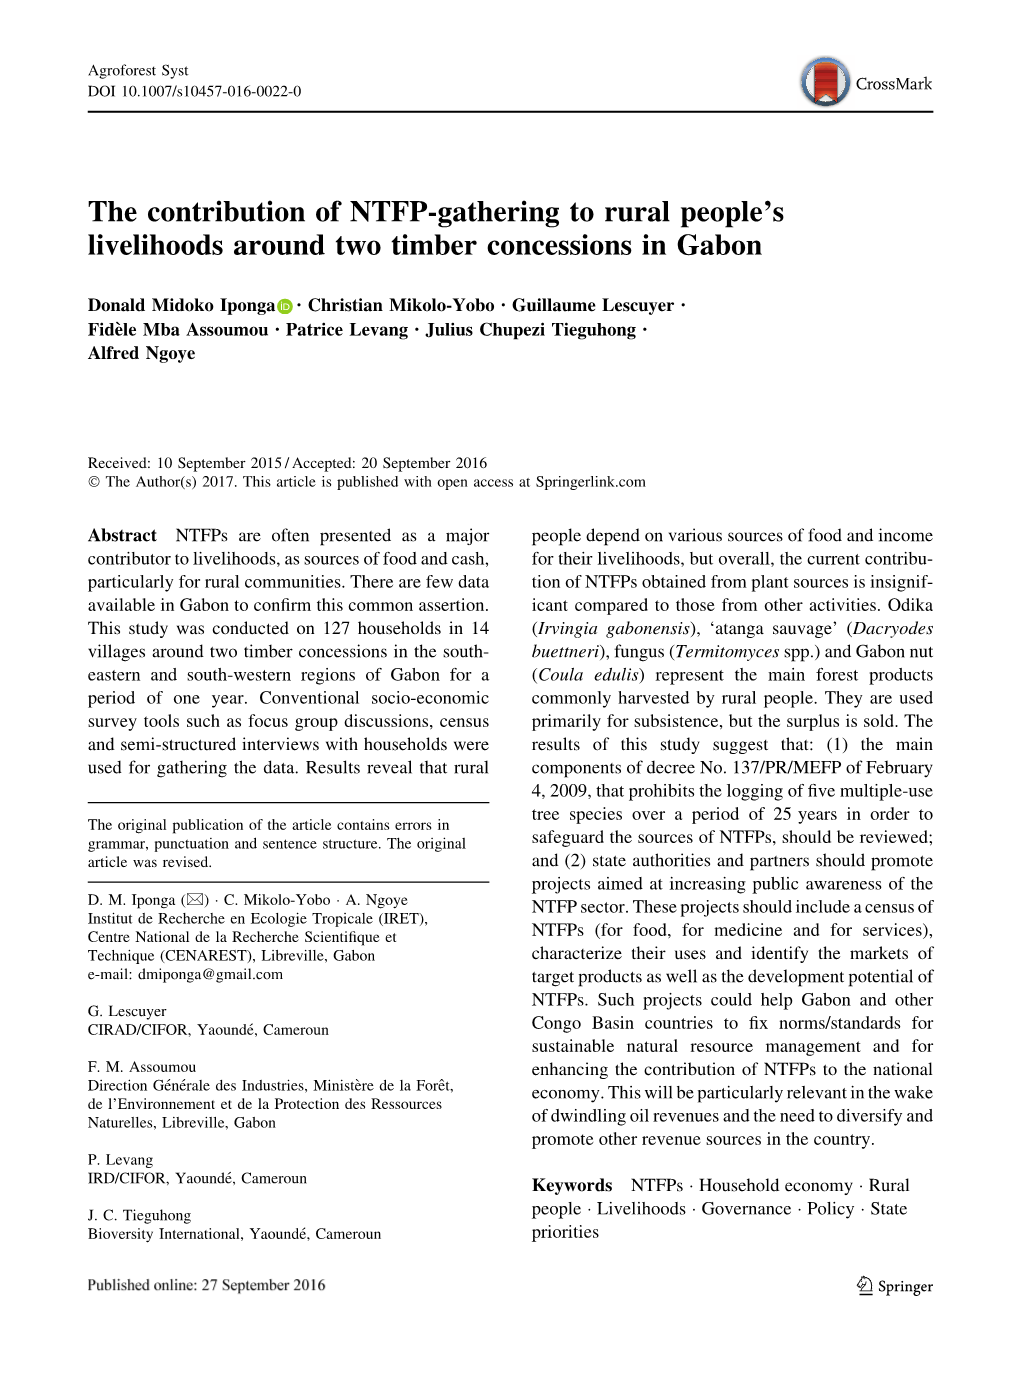 The Contribution of NTFP-Gathering to Rural People's Livelihoods Around